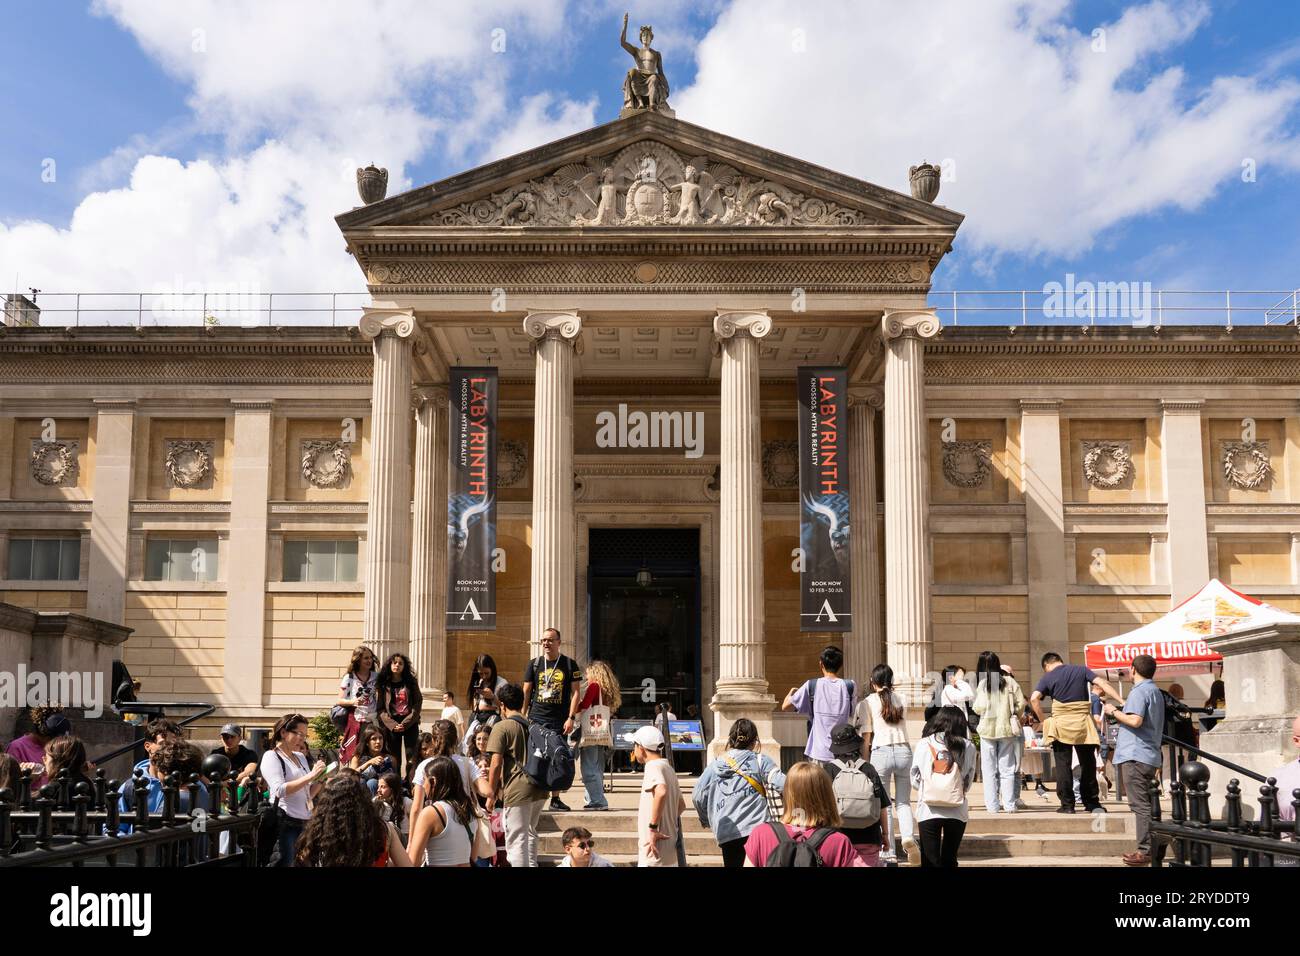 The front facade of Oxford Ashmolean Museum. The Ashmolean is the University of Oxford’s museum of art and archaeology, founded in 1683. England Stock Photo